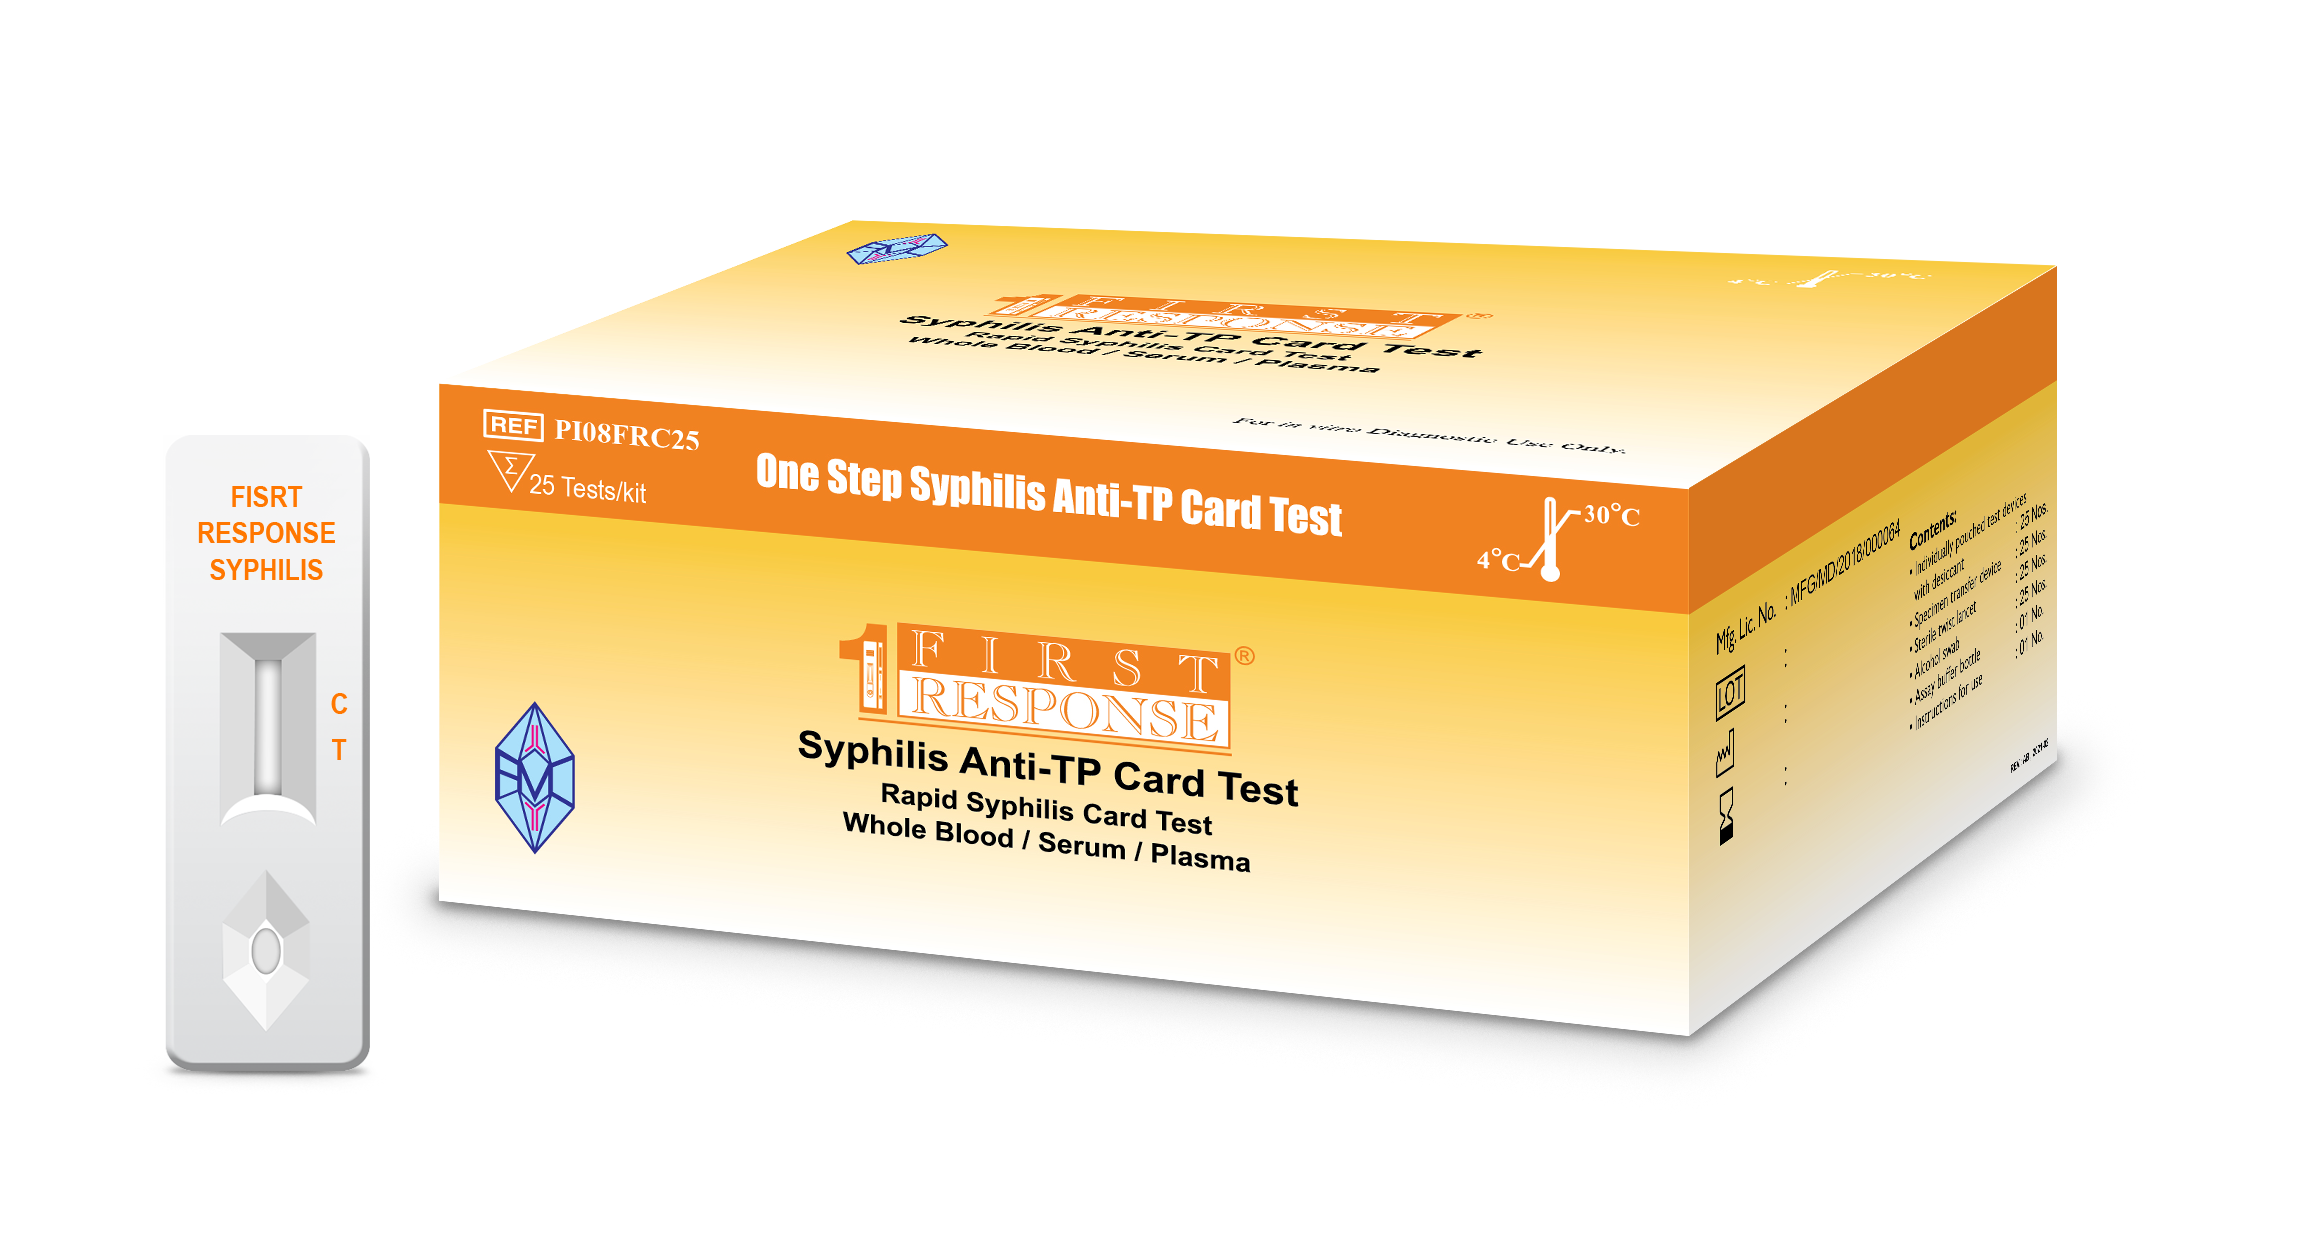 WHO Prequalification of First Response® Syphilis Anti-TP Card Test